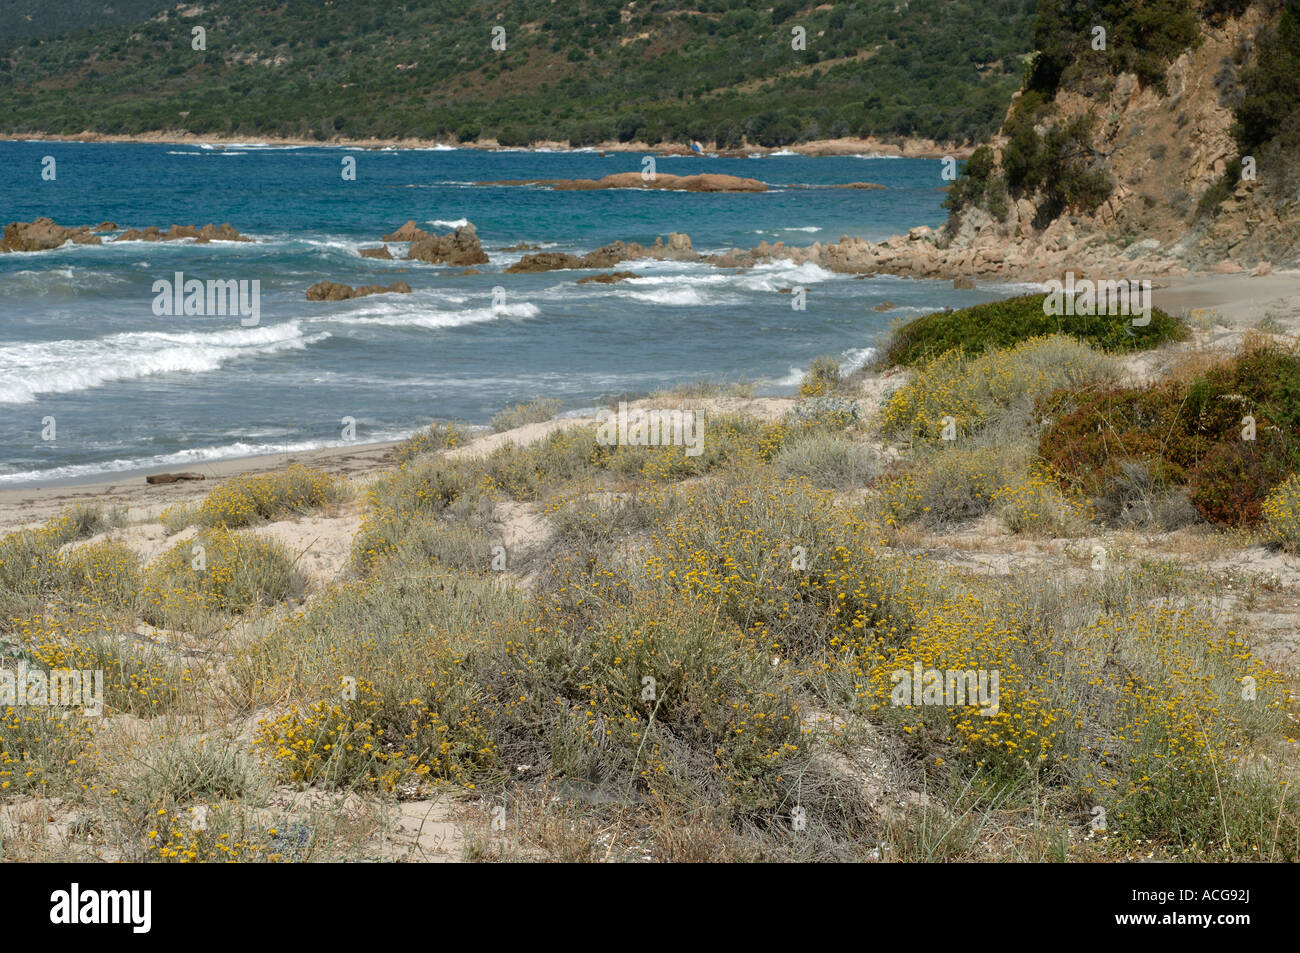 Helichrysum arenaria flowering on a sandy beach with the Mediterranean behind Corsica Stock Photo